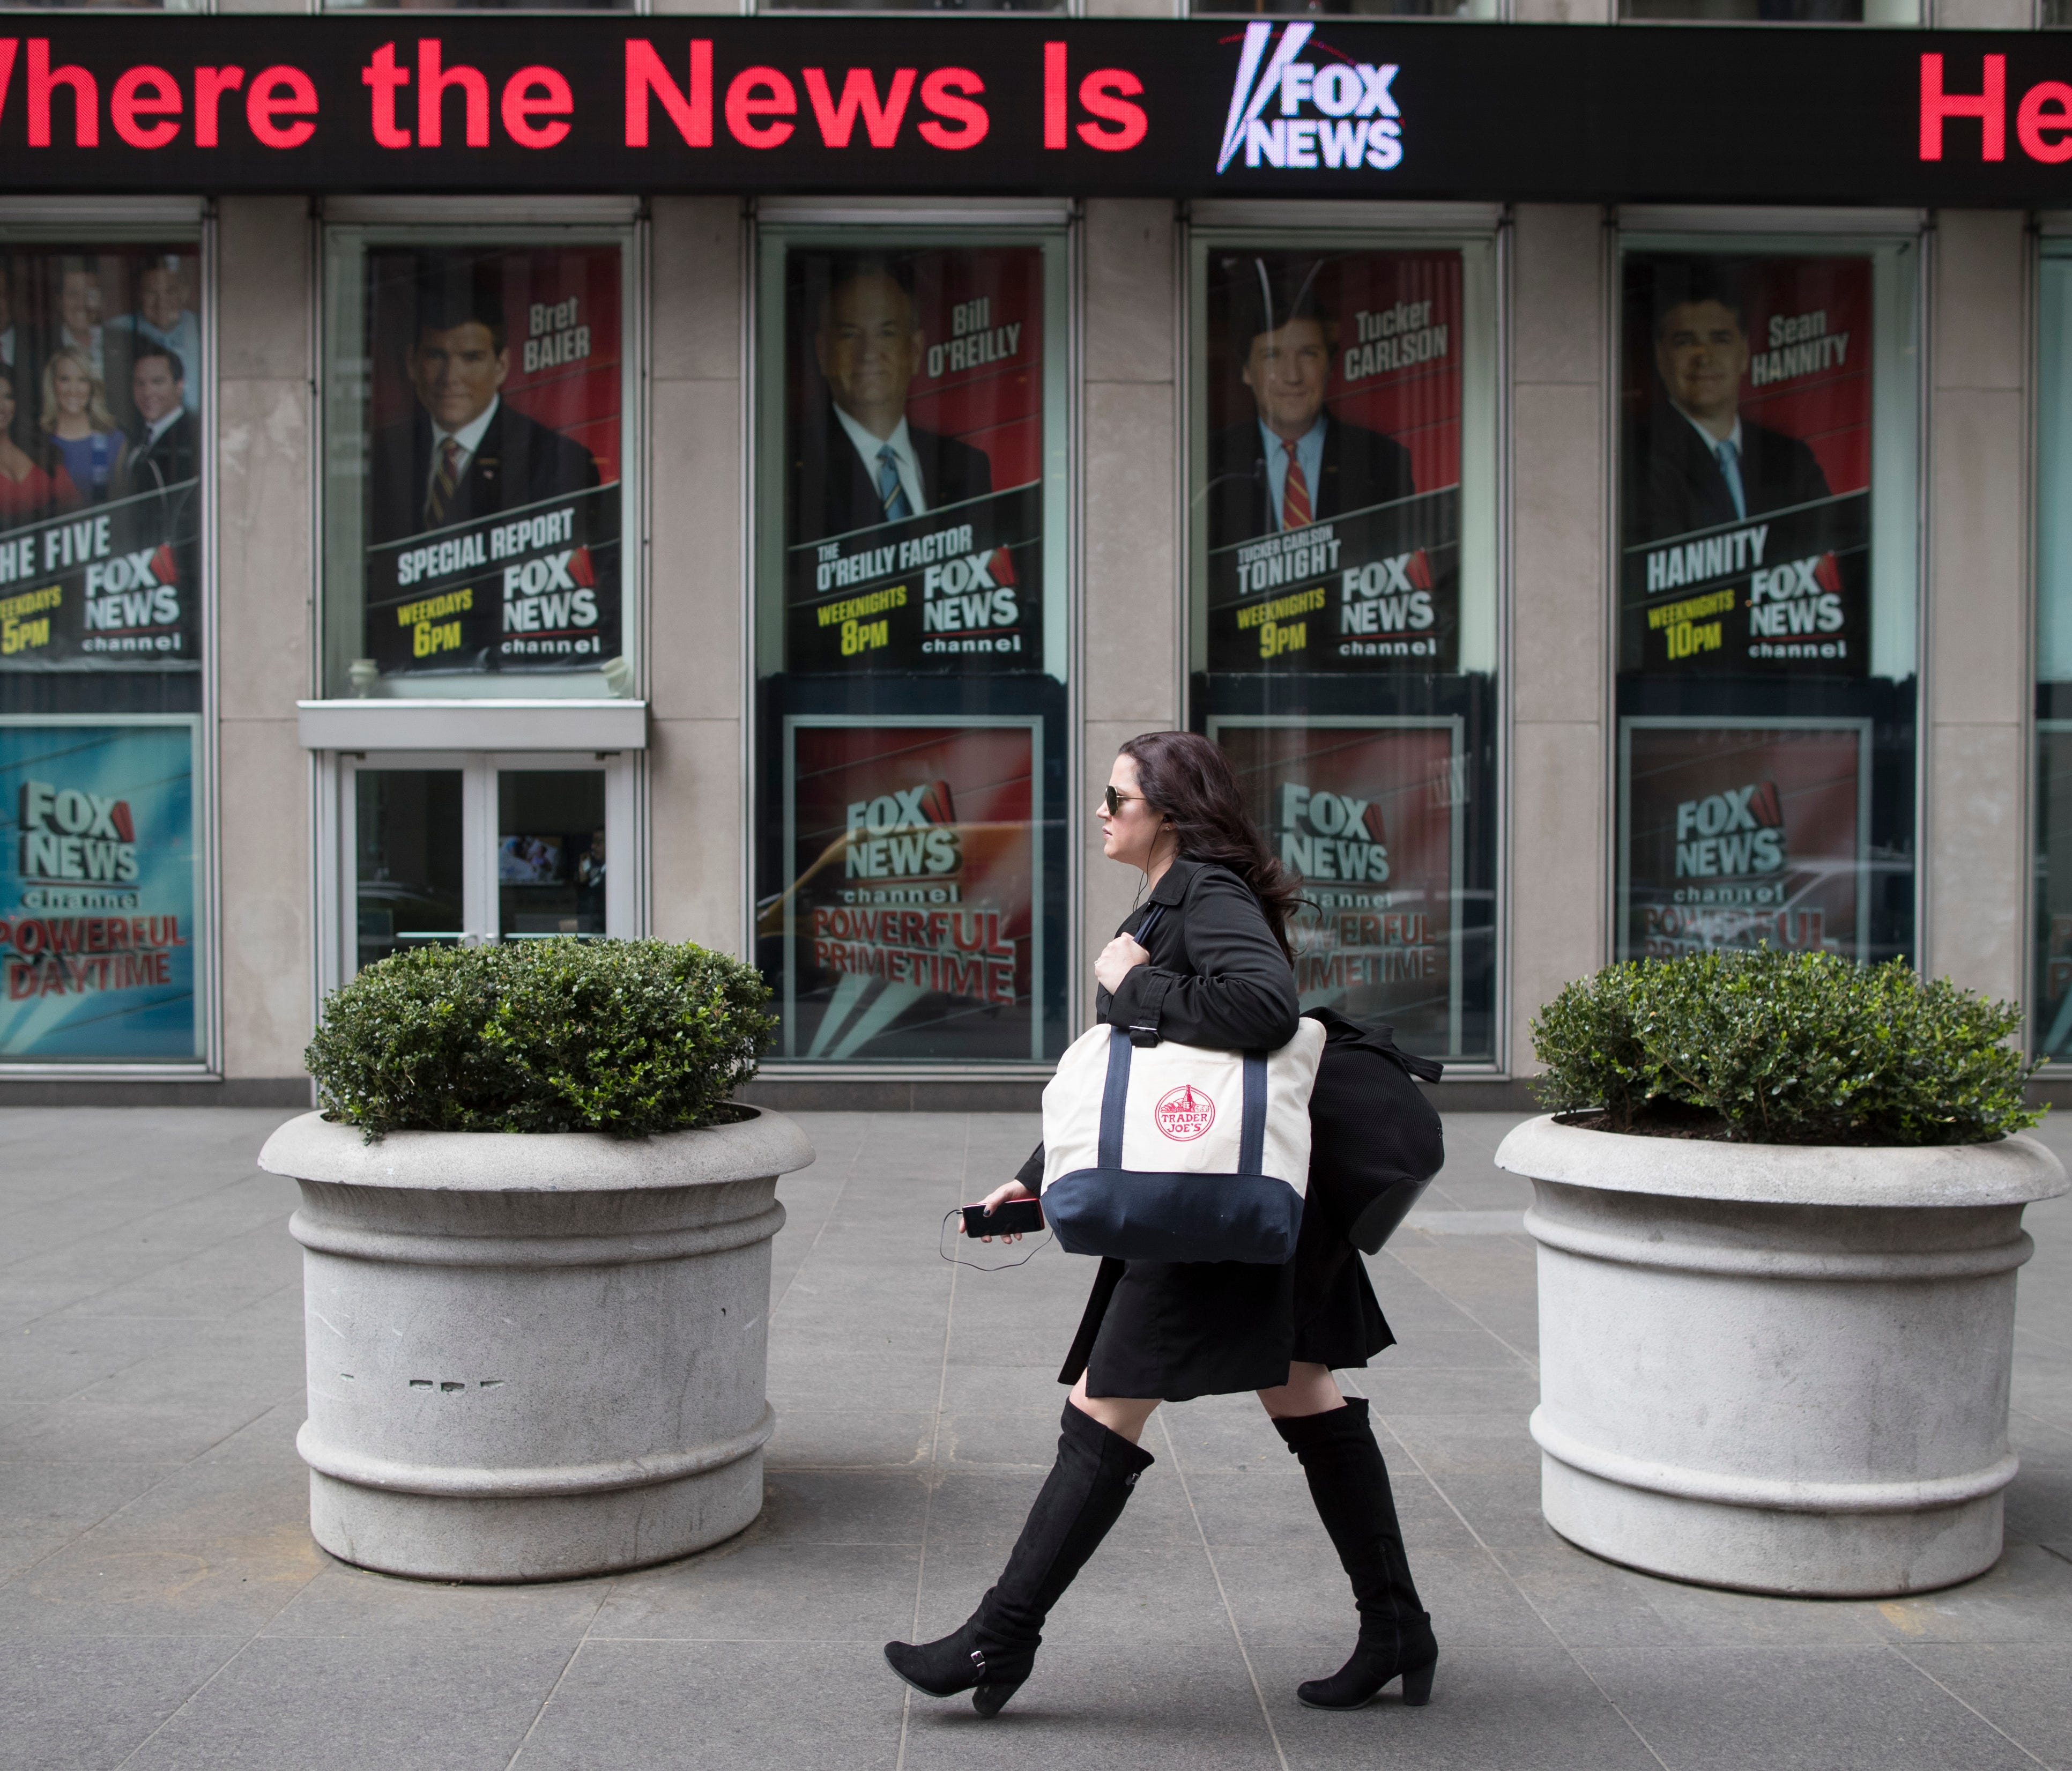 A woman walks past the News Corp. headquarters building displaying posters featuring Fox News Channel personalities including  Bill O'Reilly, top center, in New York, Wednesday, April 19, 2017. T